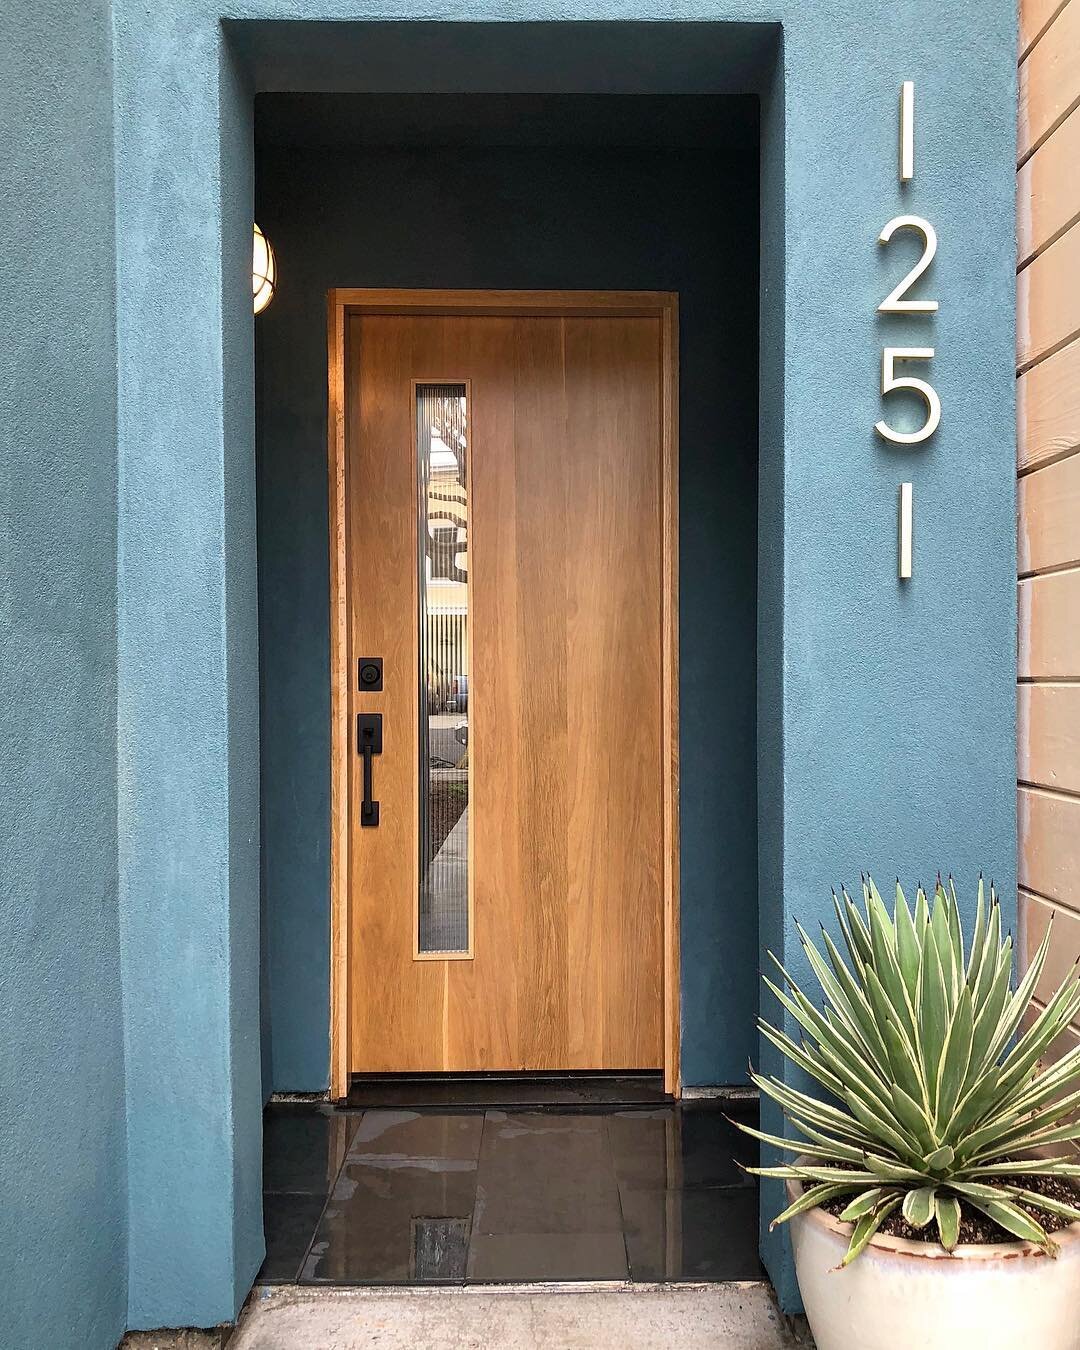 Welcome home. Vestibule shot of one of our recently completed projects in the Sunset District. iPhone shot here, but just wrapped up the professional photoshoot last week. Stay tuned for the complete project breakdown!